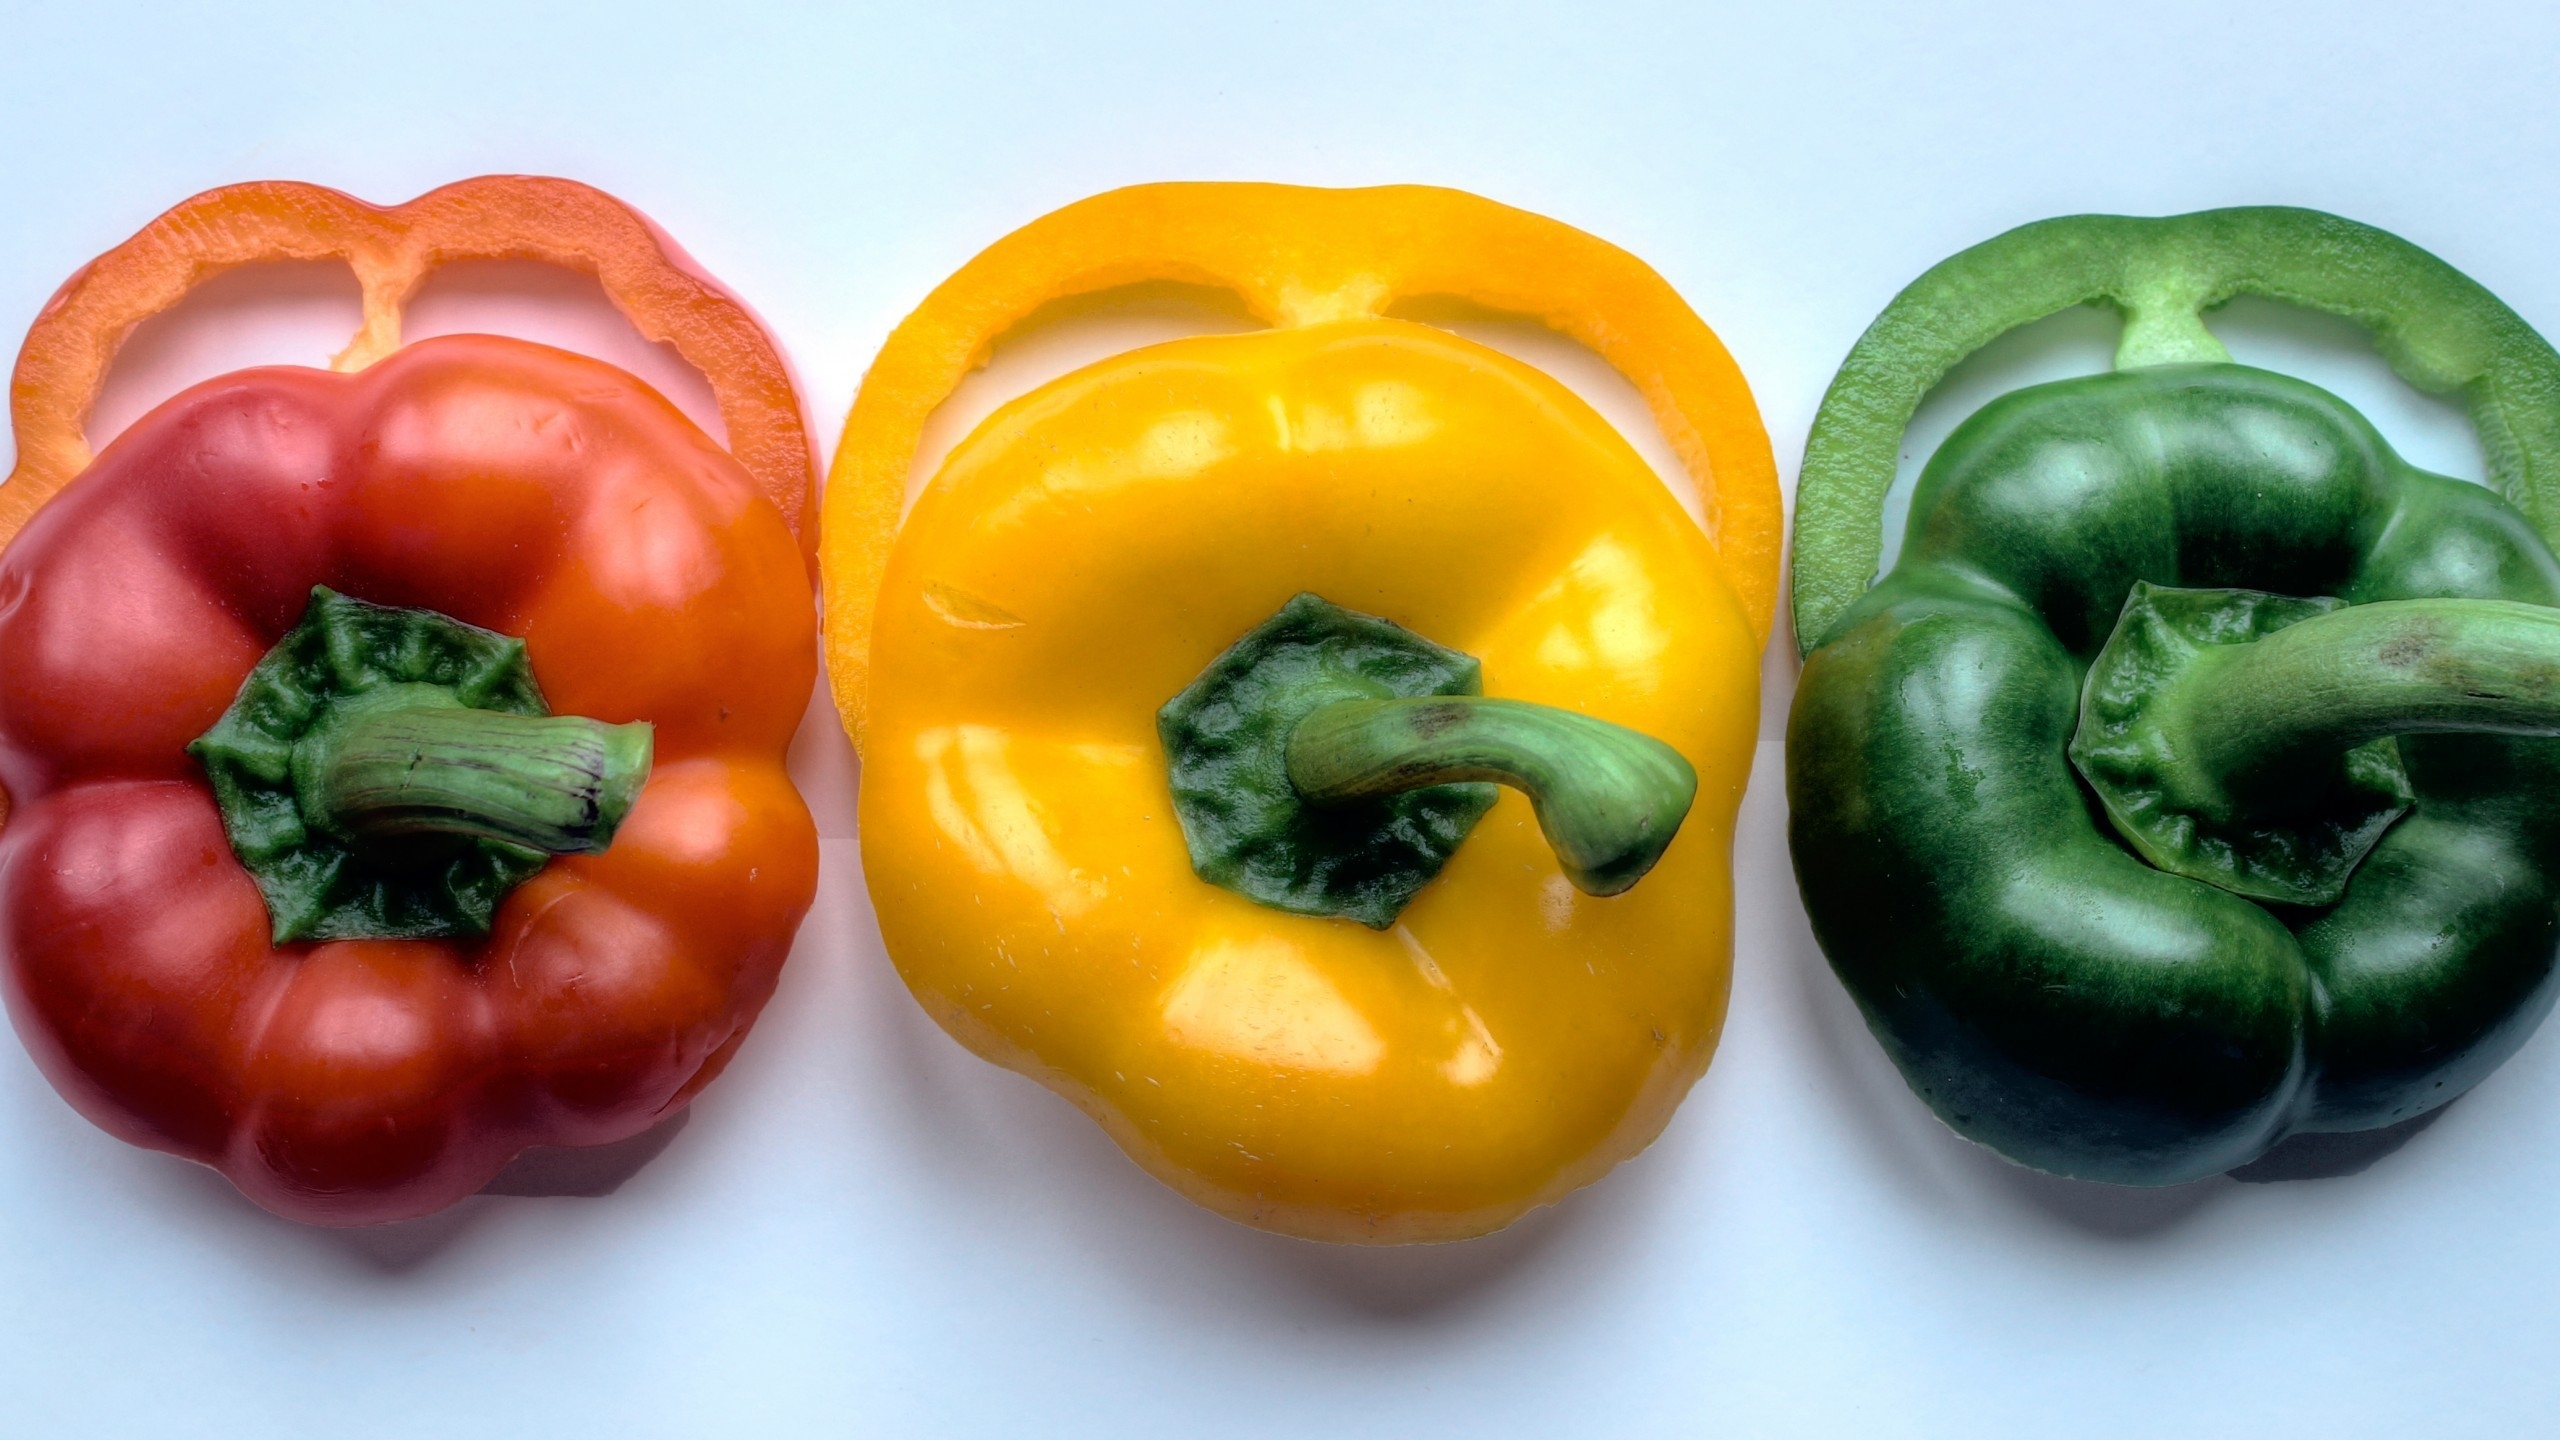 TriColor Peppers for 2560x1440 HDTV resolution